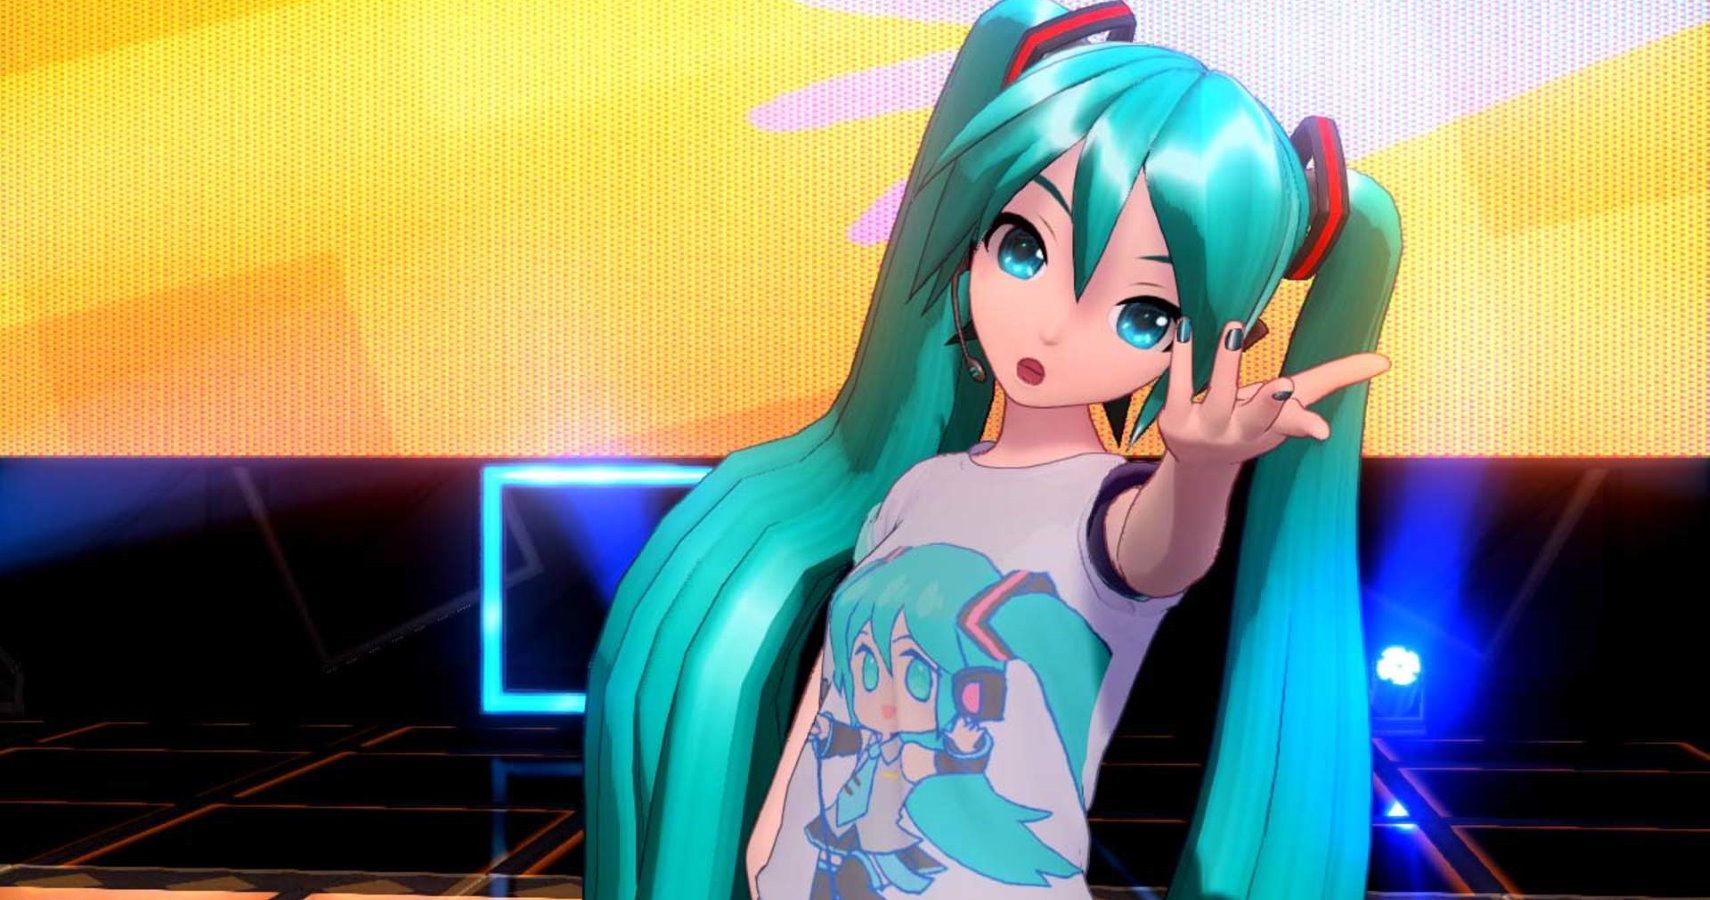 Sega Teases New Hatsune Diva Mega Mix Information To Be Announced This Month